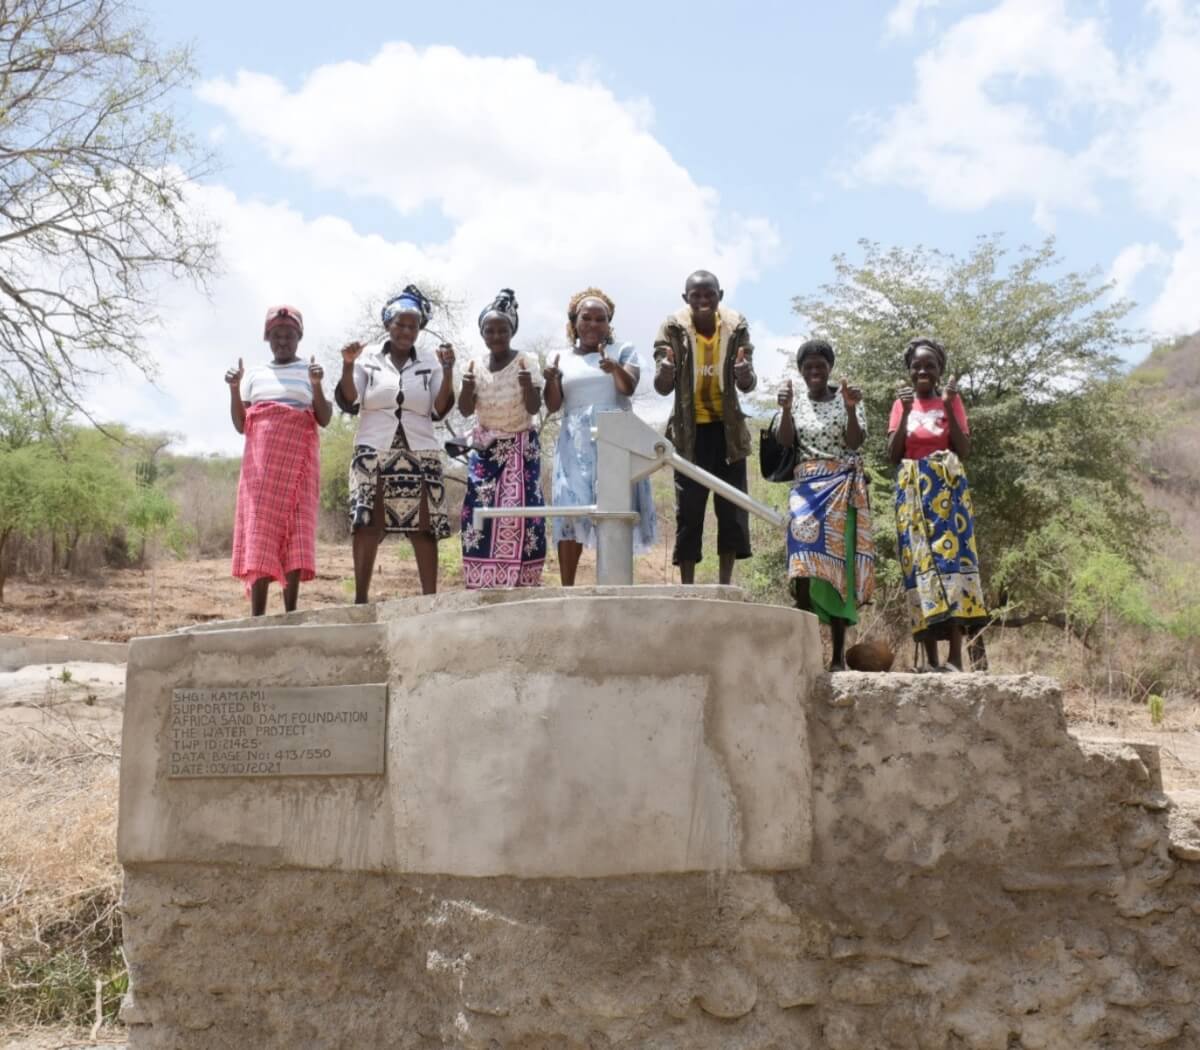 Supplying Clean Water to Communities in Sub-Saharan Africa